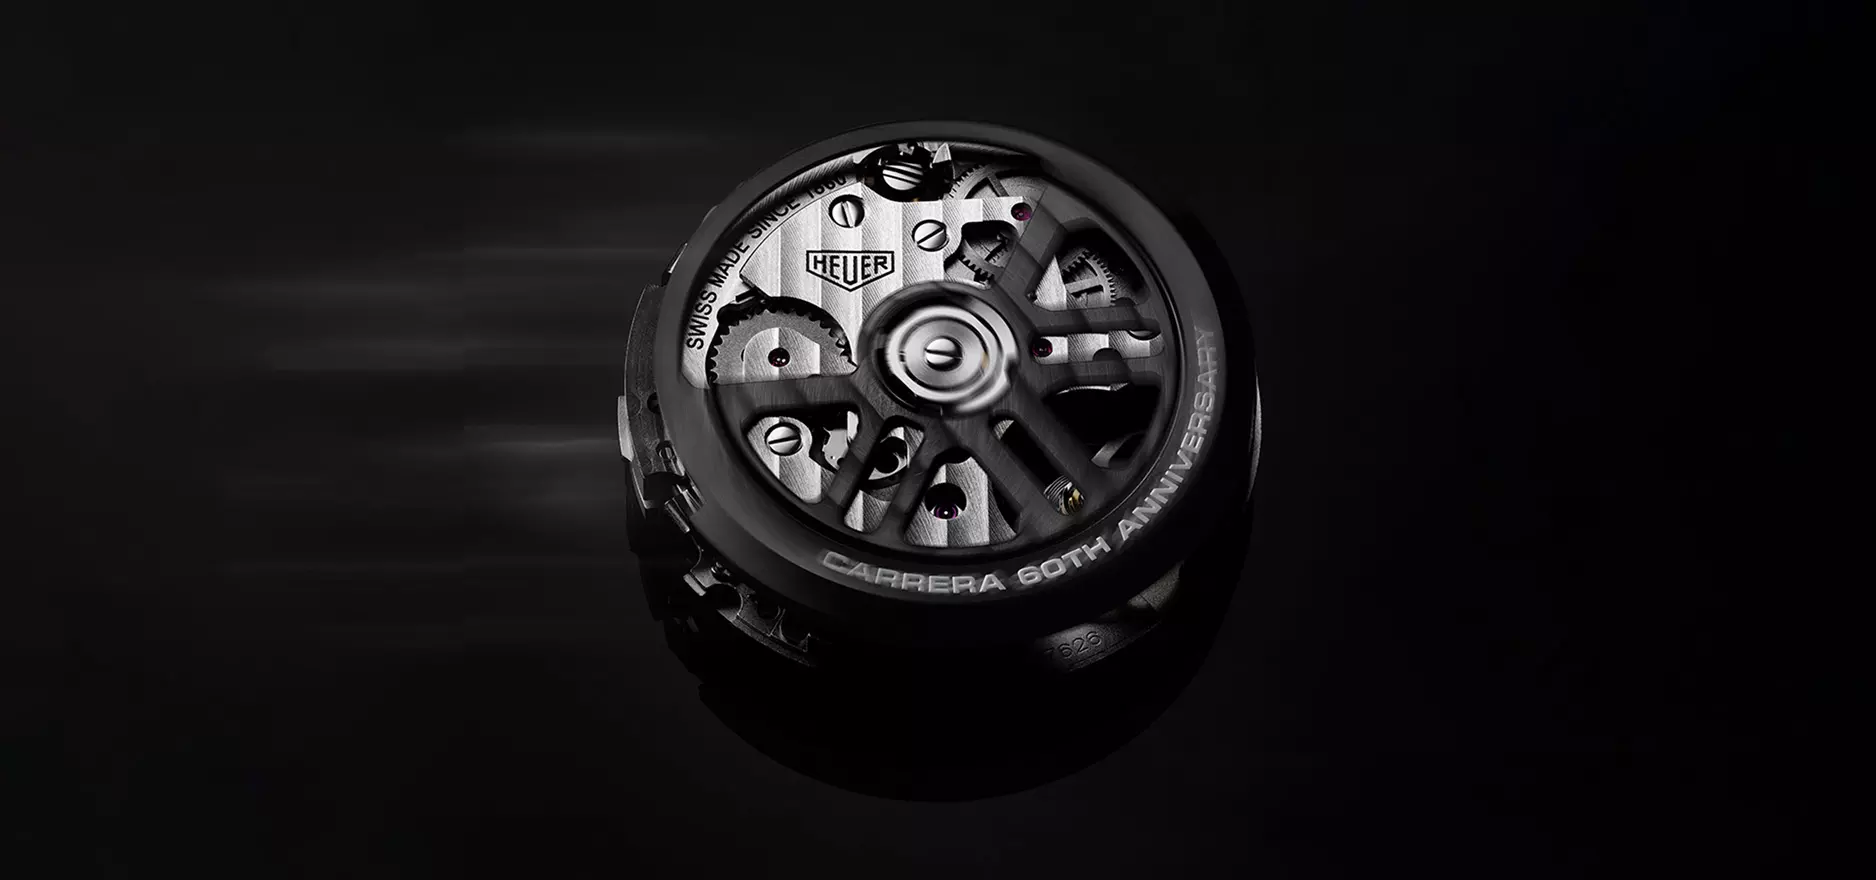 The Heuer 02 Calibre for TAG Heuer's Carrera Chronograph 60th Anniversary has an engraving on the rotor.